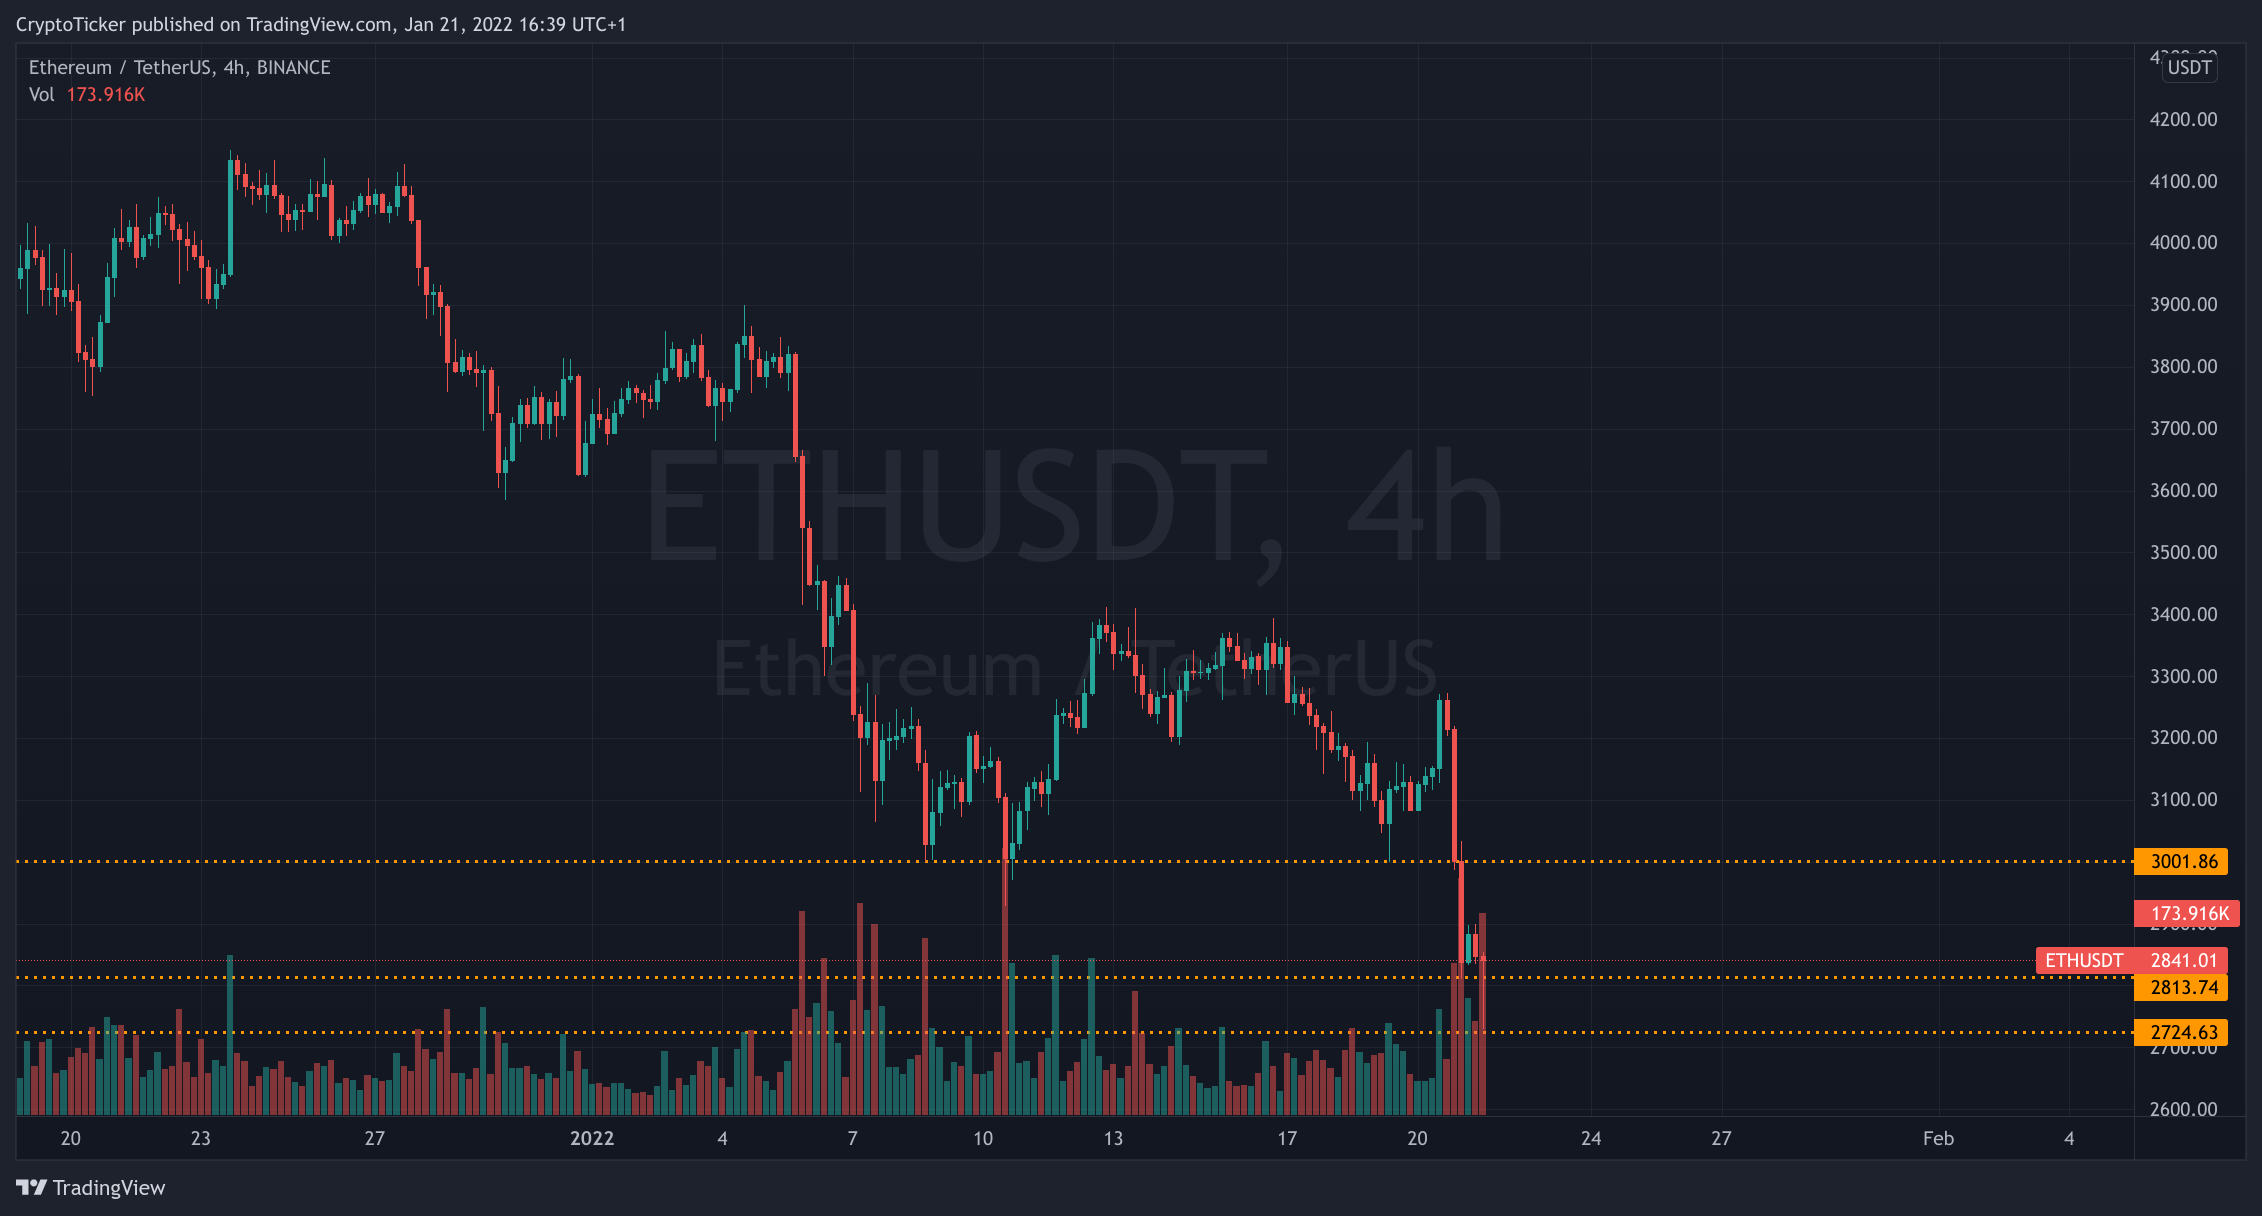 Ethereum price down - ETH/USD 4-hours chart showing the selloff of ETH